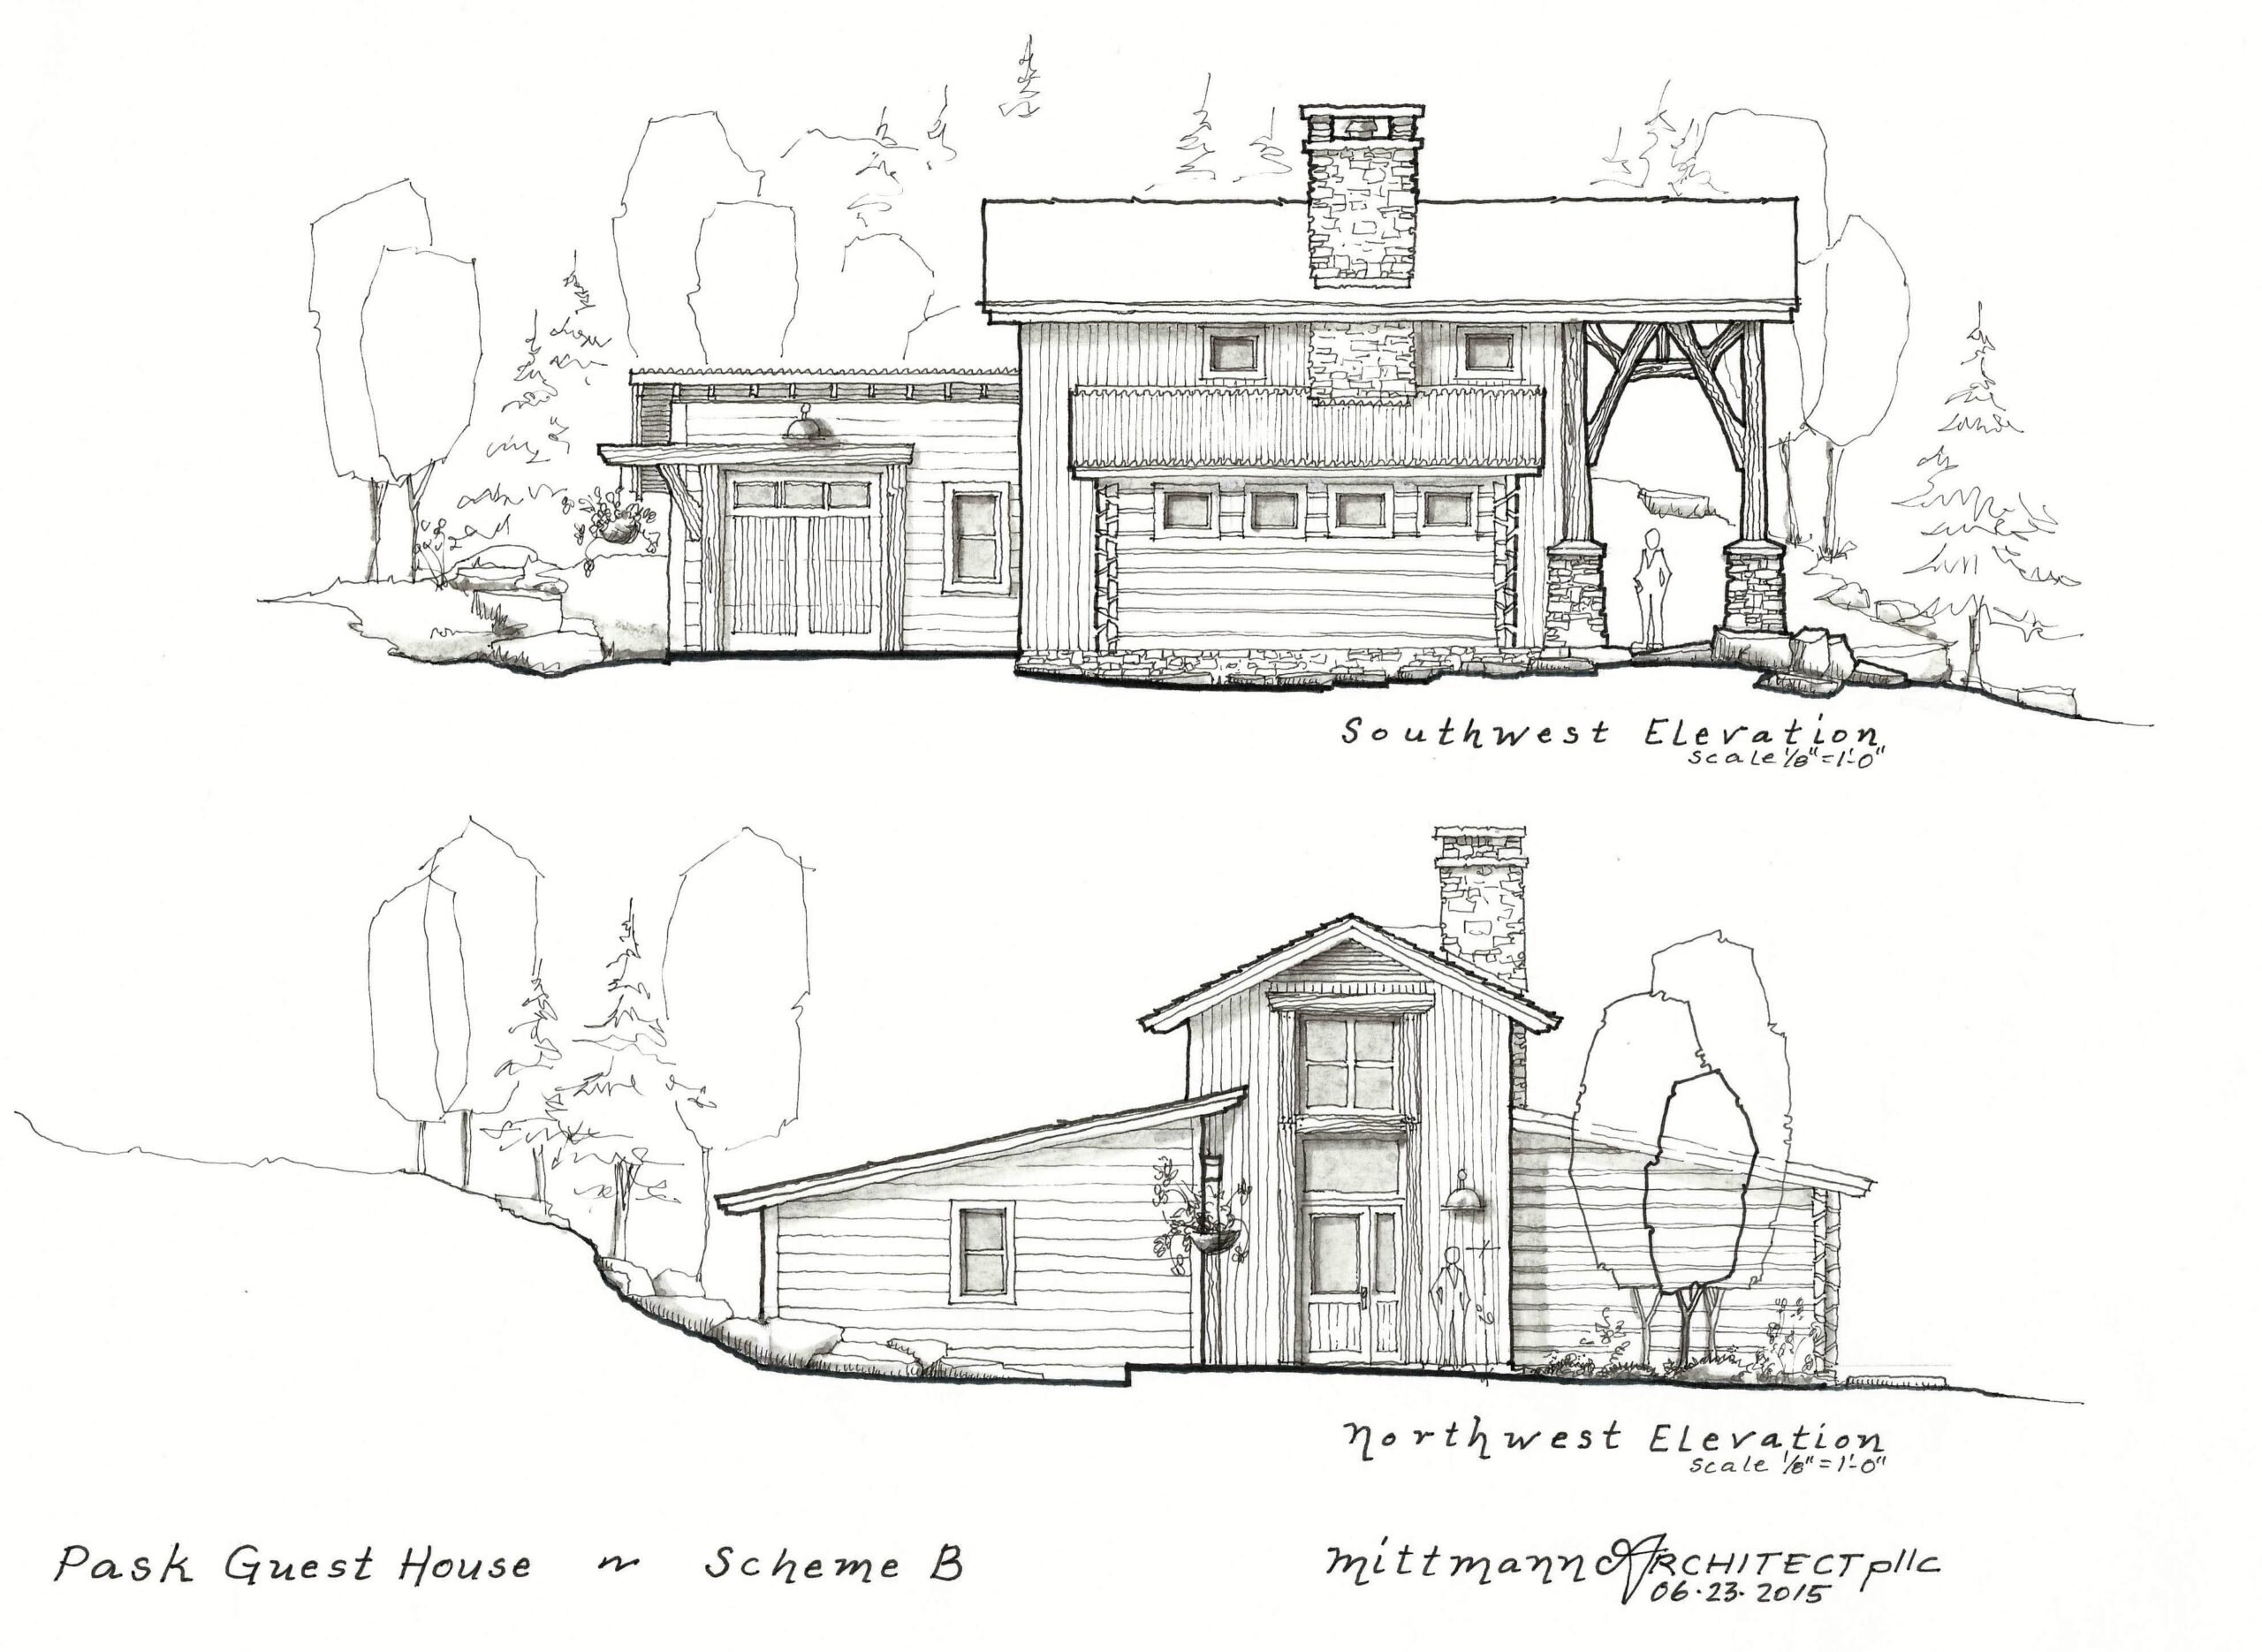 pask-guest-house-mittmann-architect-third-sketch